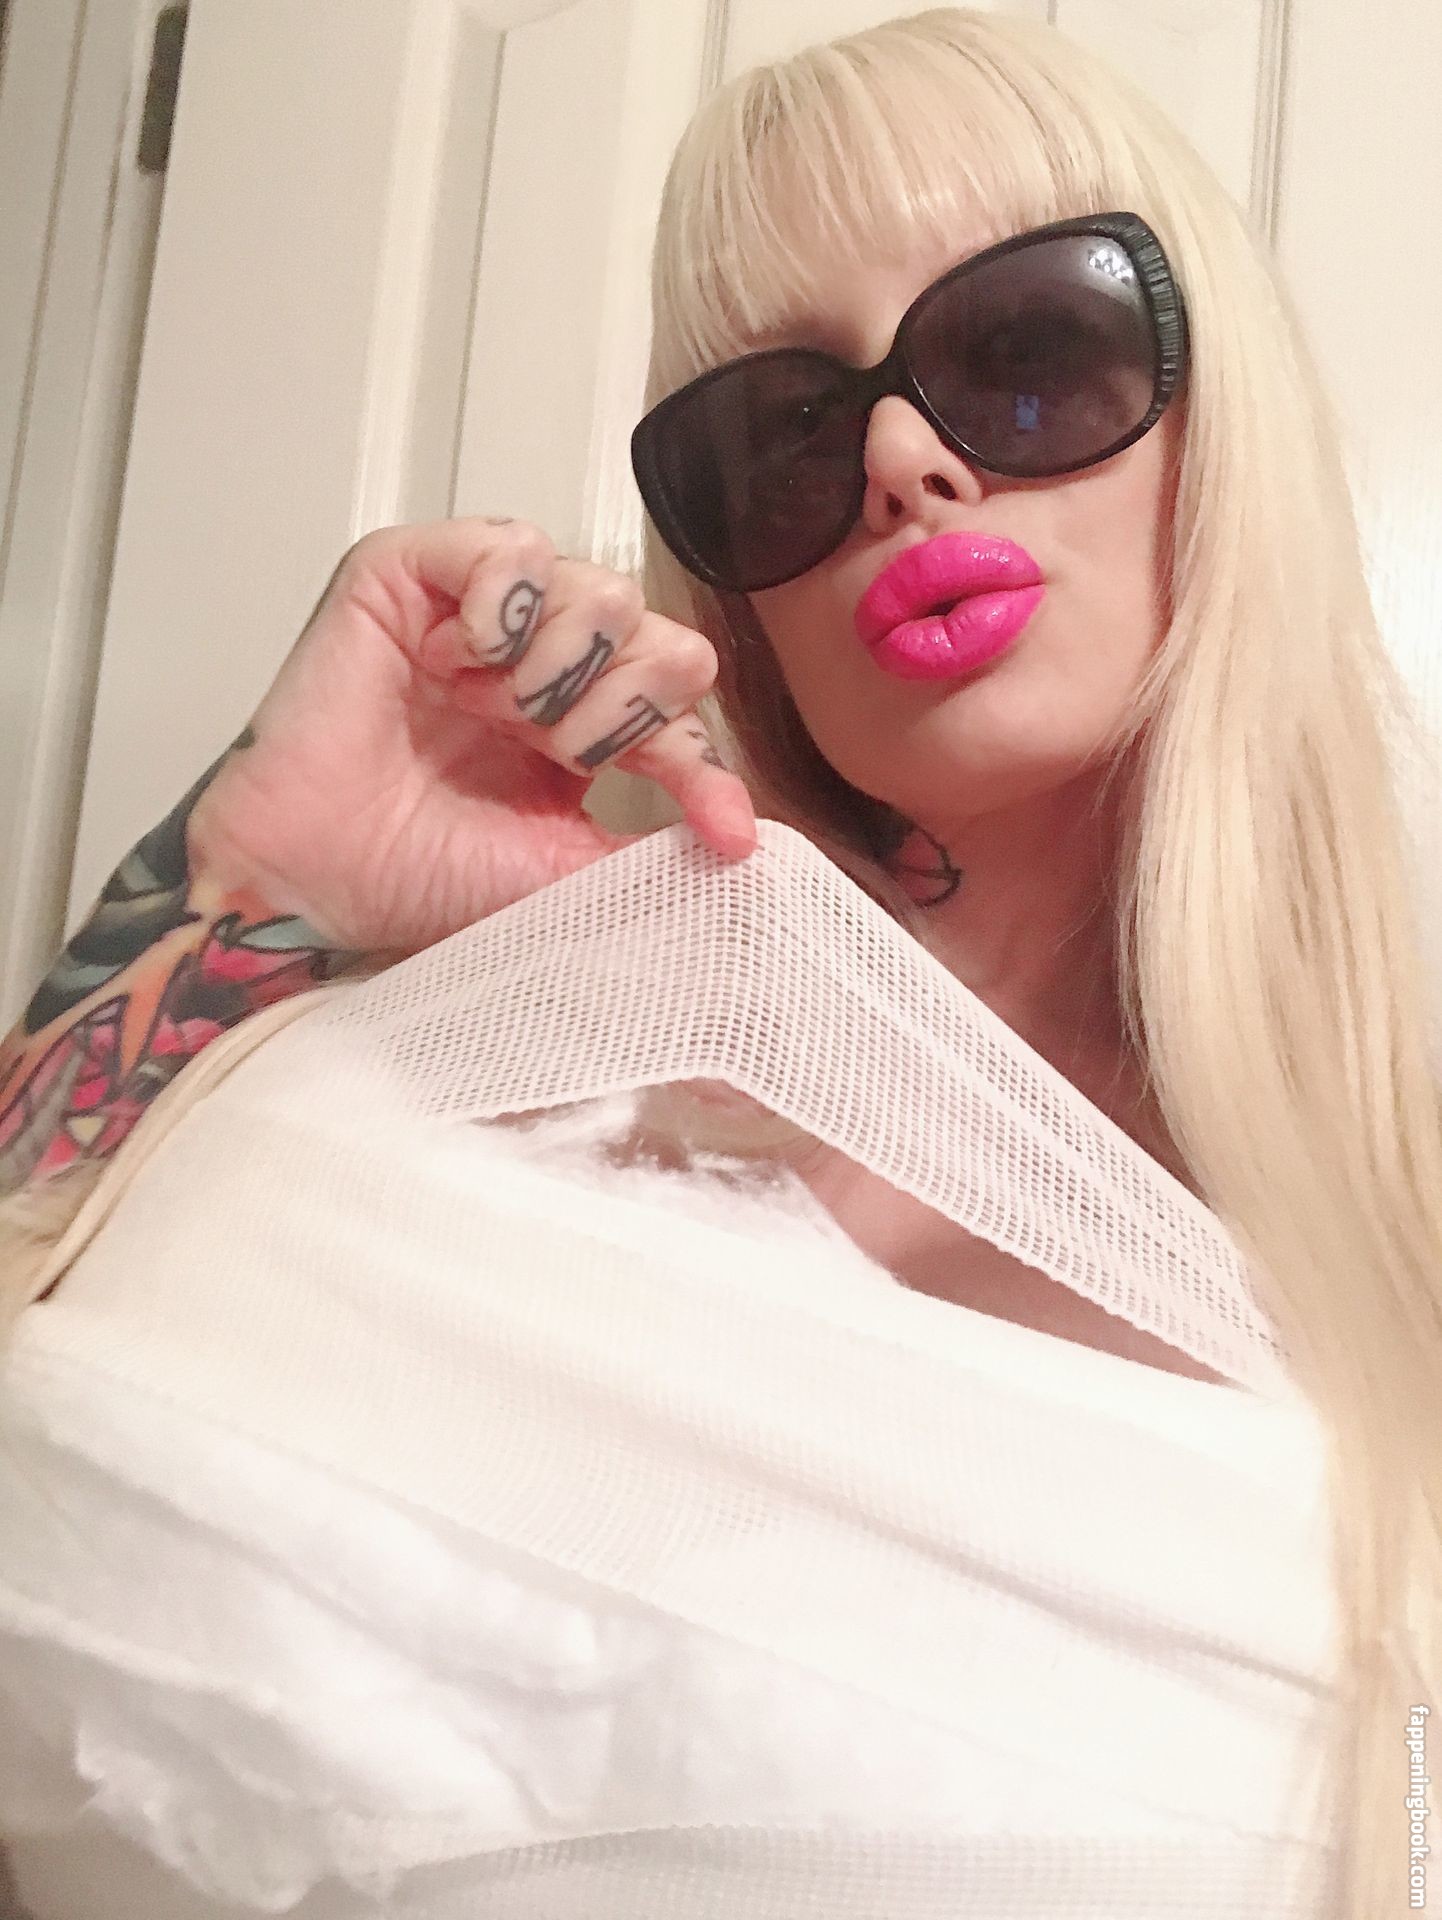 Sabrina Sabrok Nude The Fappening Photo Fappeningbook